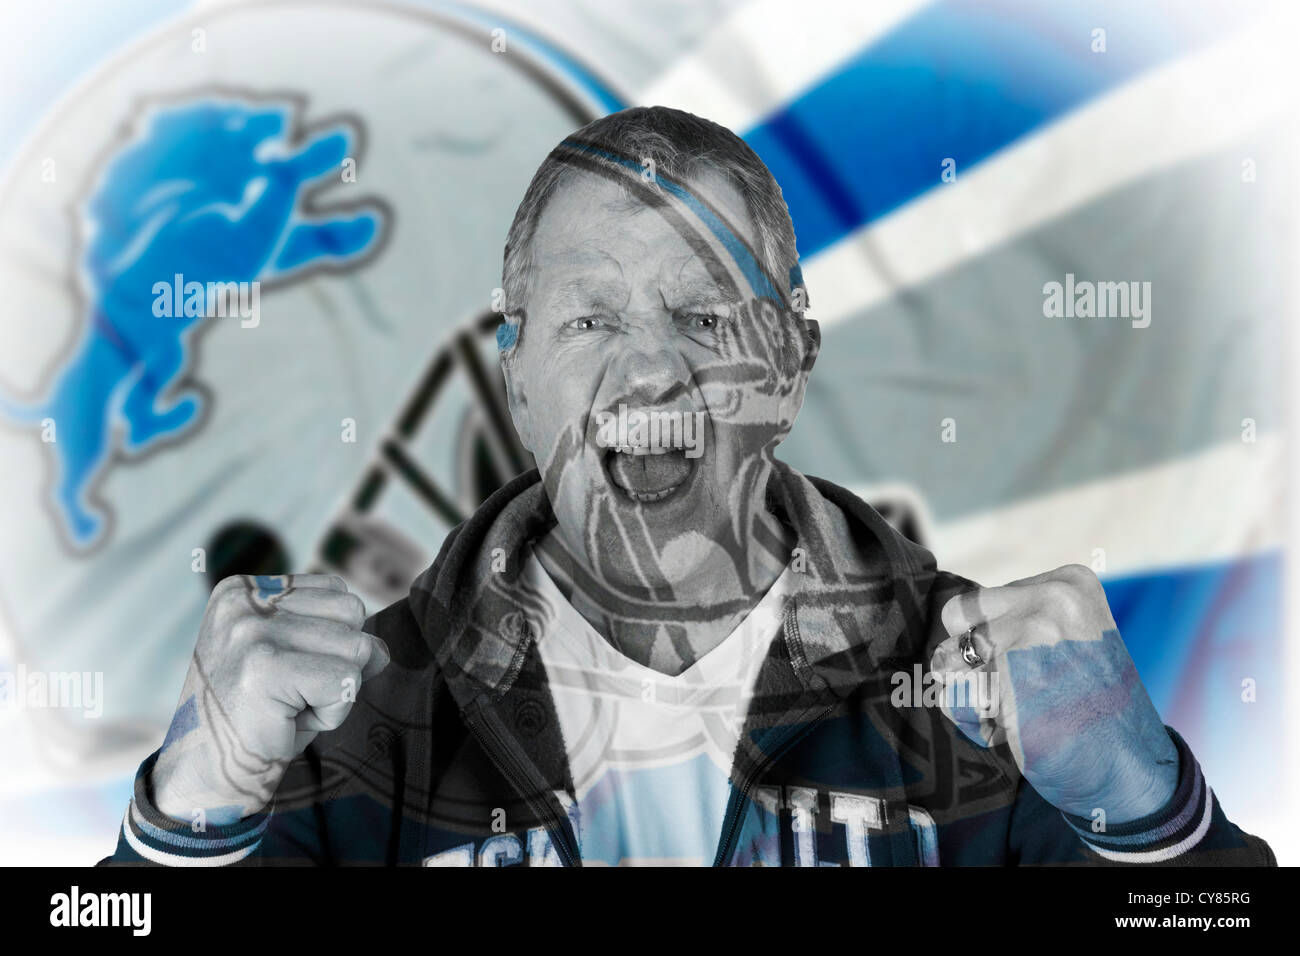 Detroit lions NFL fanatical enthusiastic loyal angry American football fan. Stock Photo